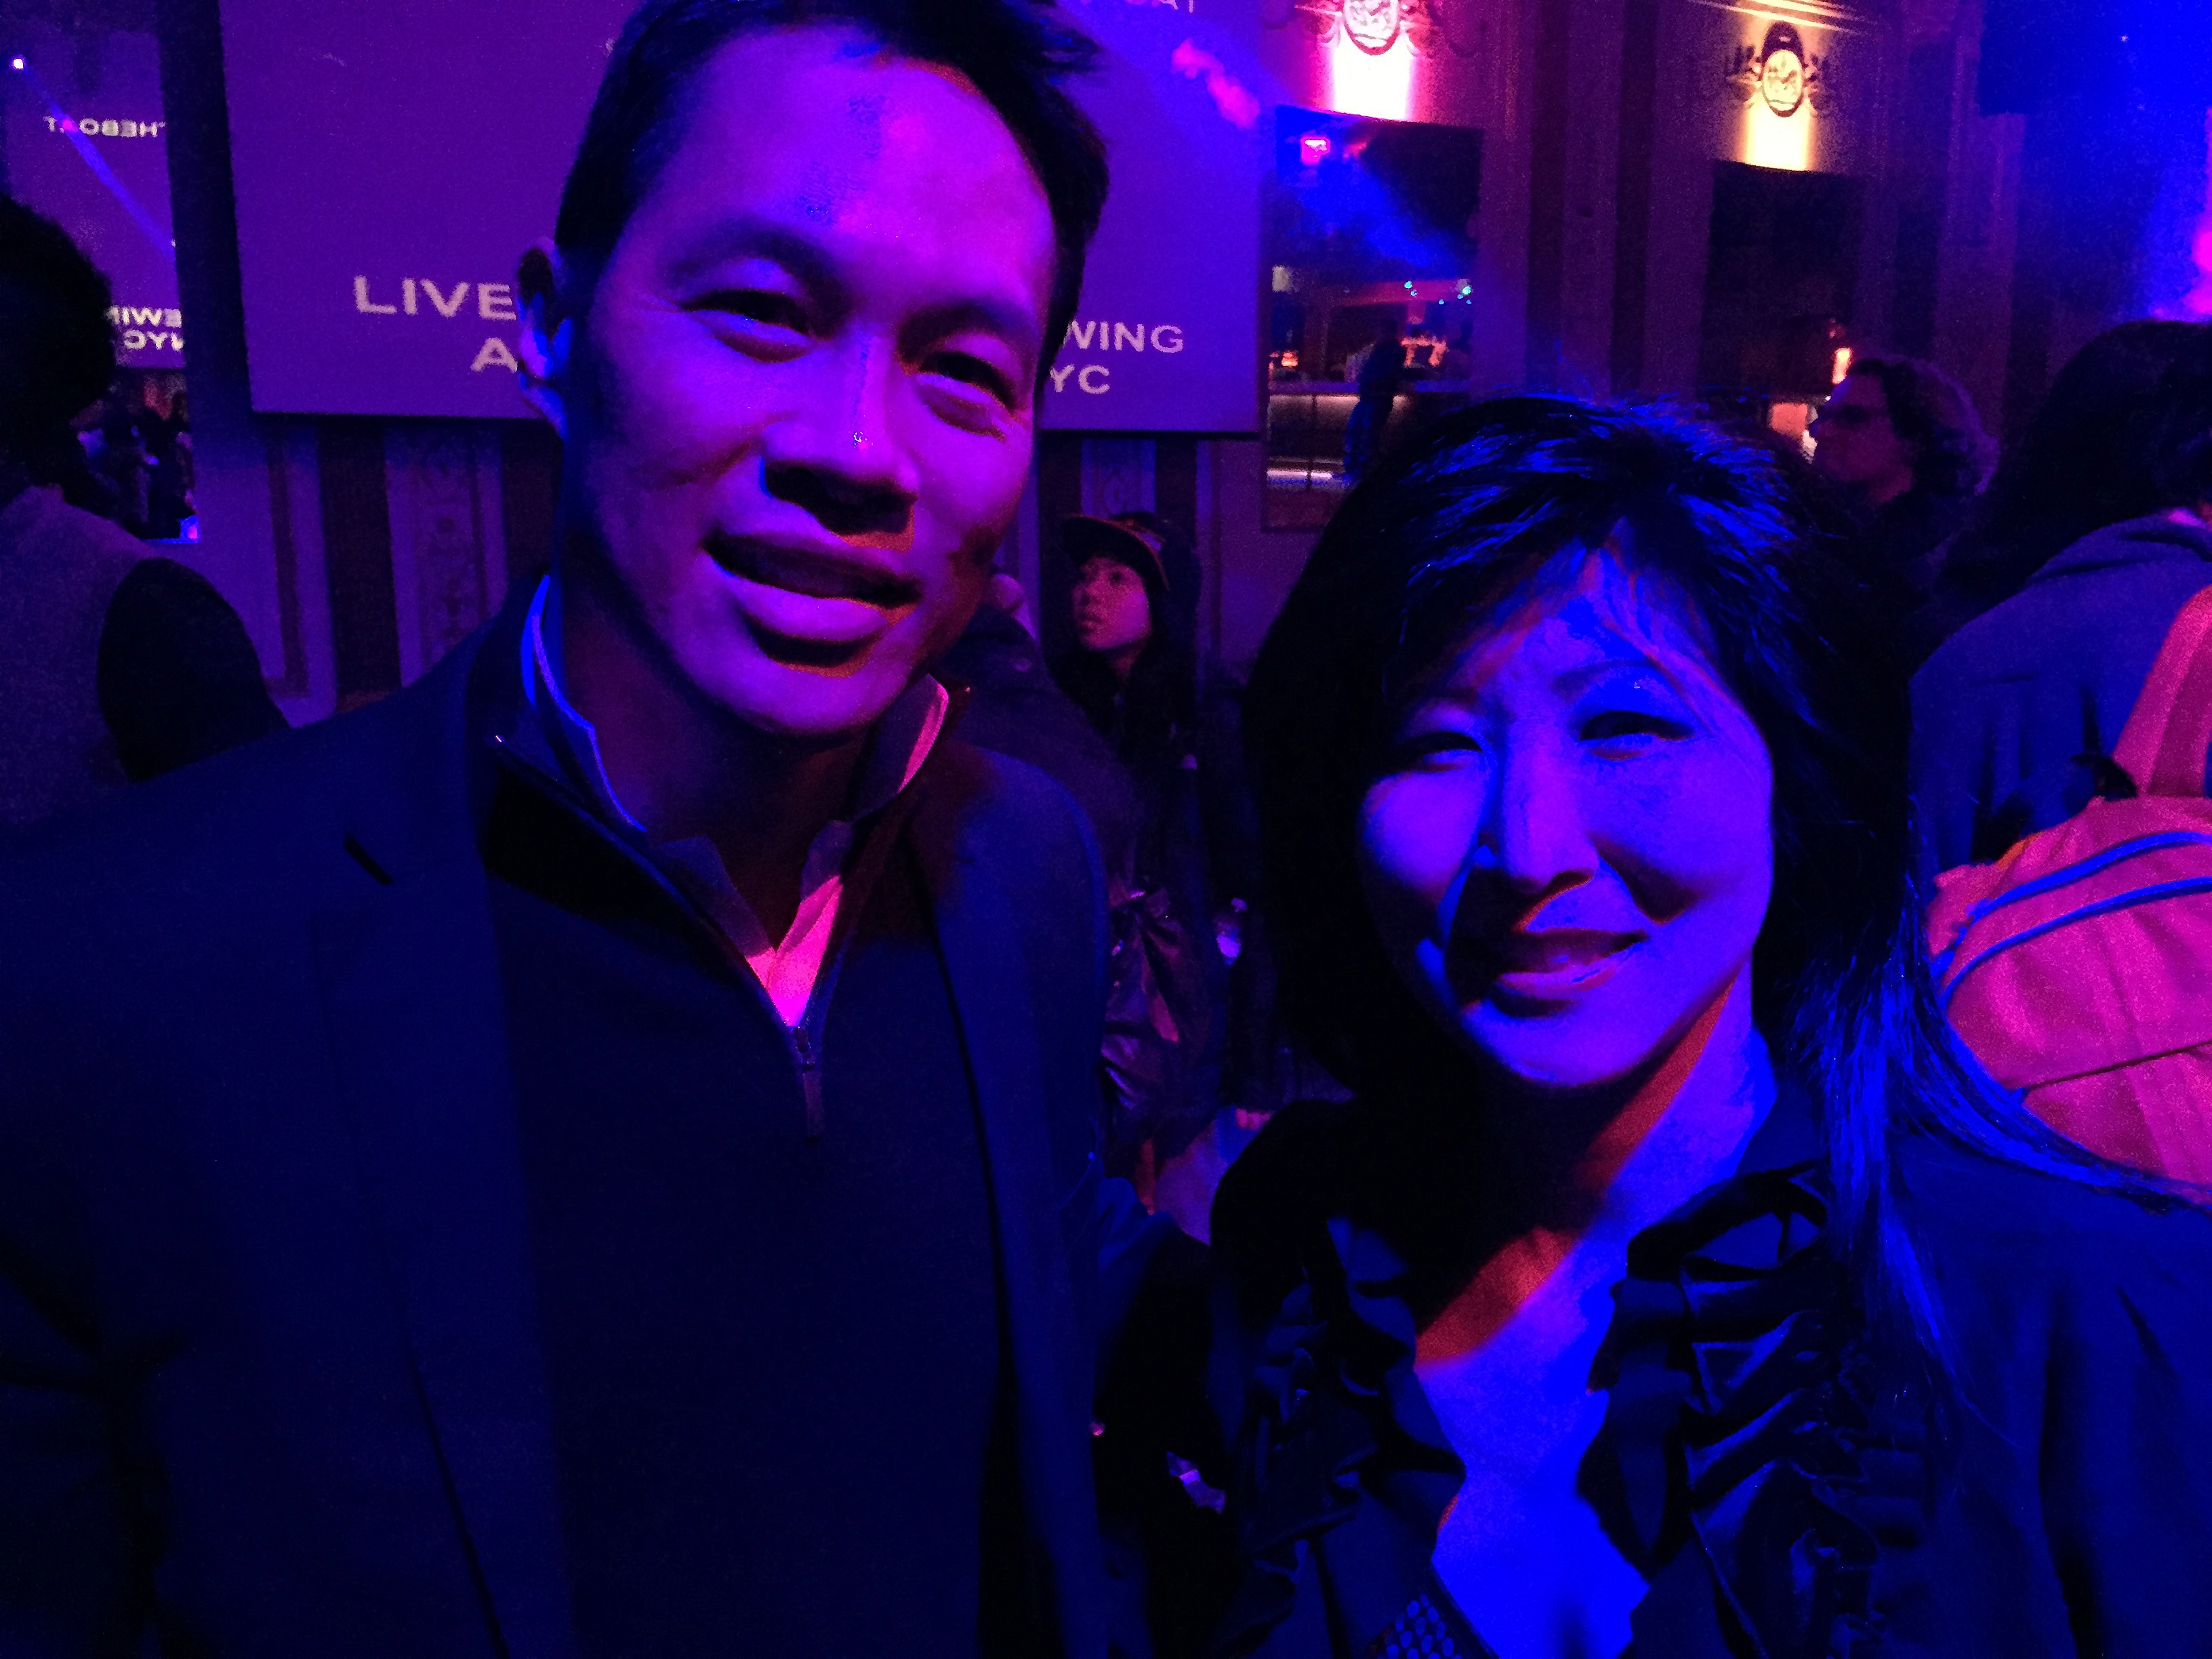 Lil Rhee with Richard Lui, Chinese American journalist and news anchor for MSNBC and NBC News at a Fresh Off The Boat event